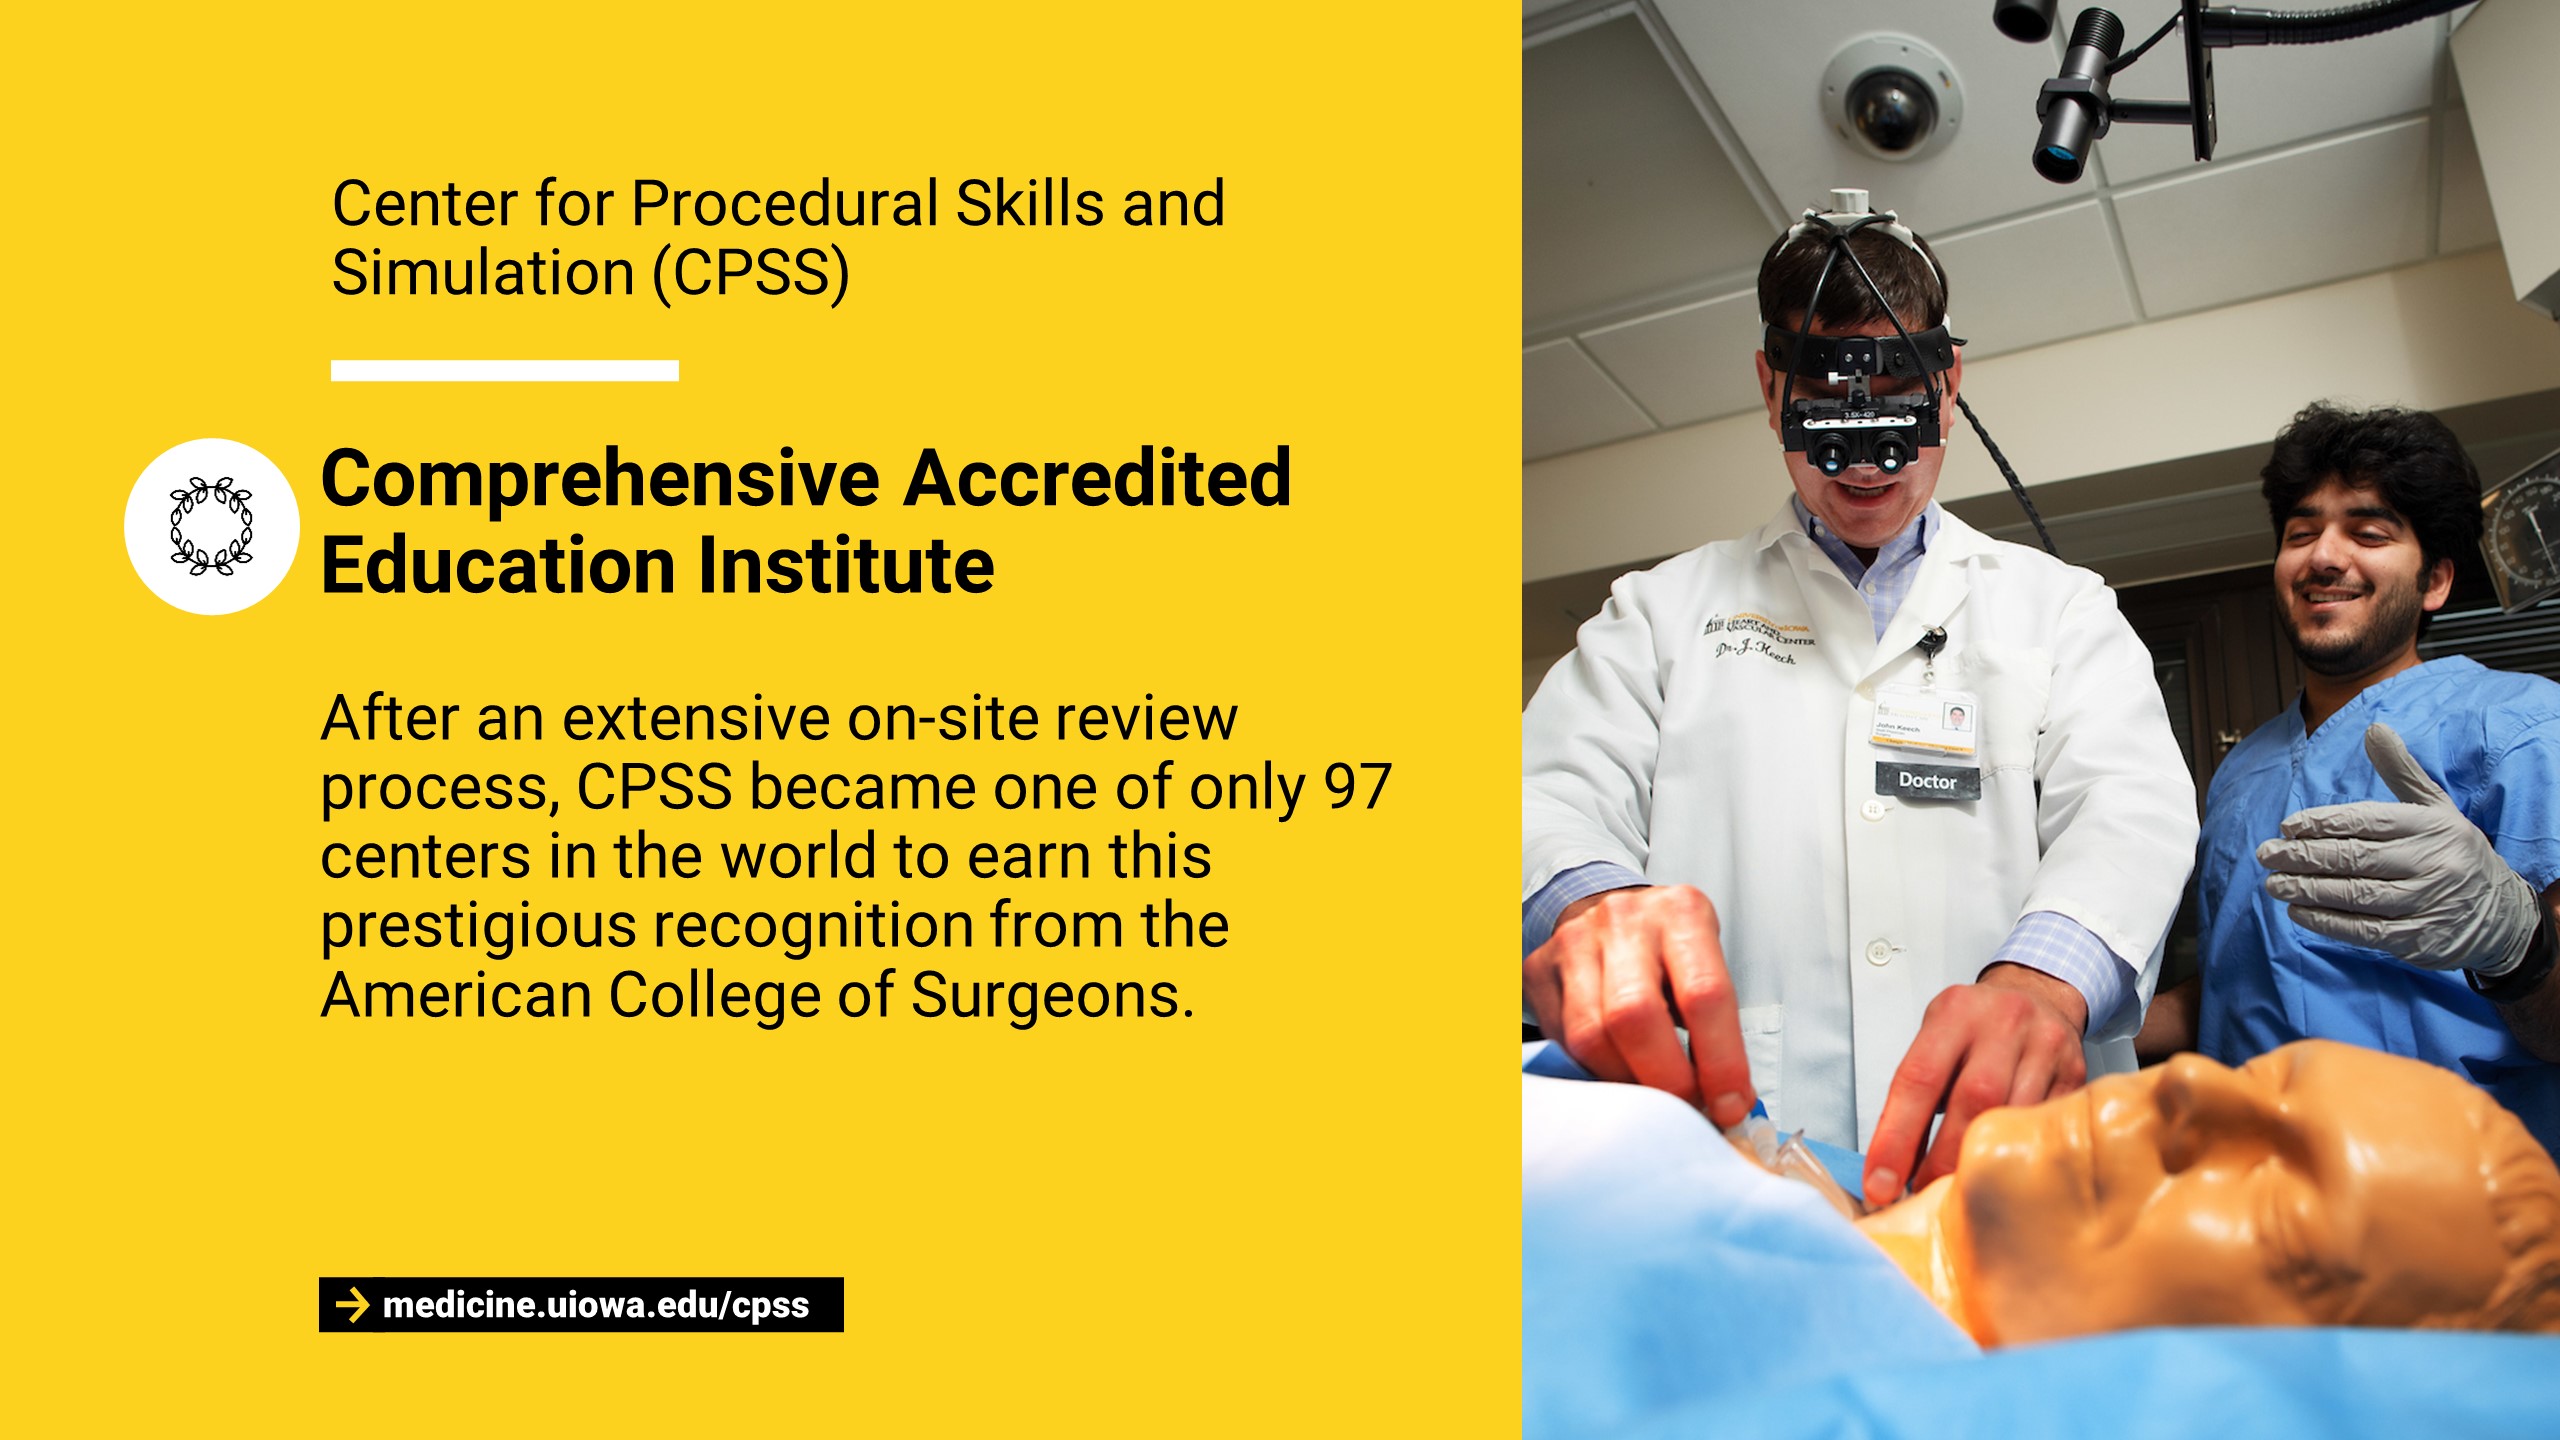 Center for Procedural Skills and Simulation has been designated a Comprehensive Accredited Education Institute by the American College of Surgeons.